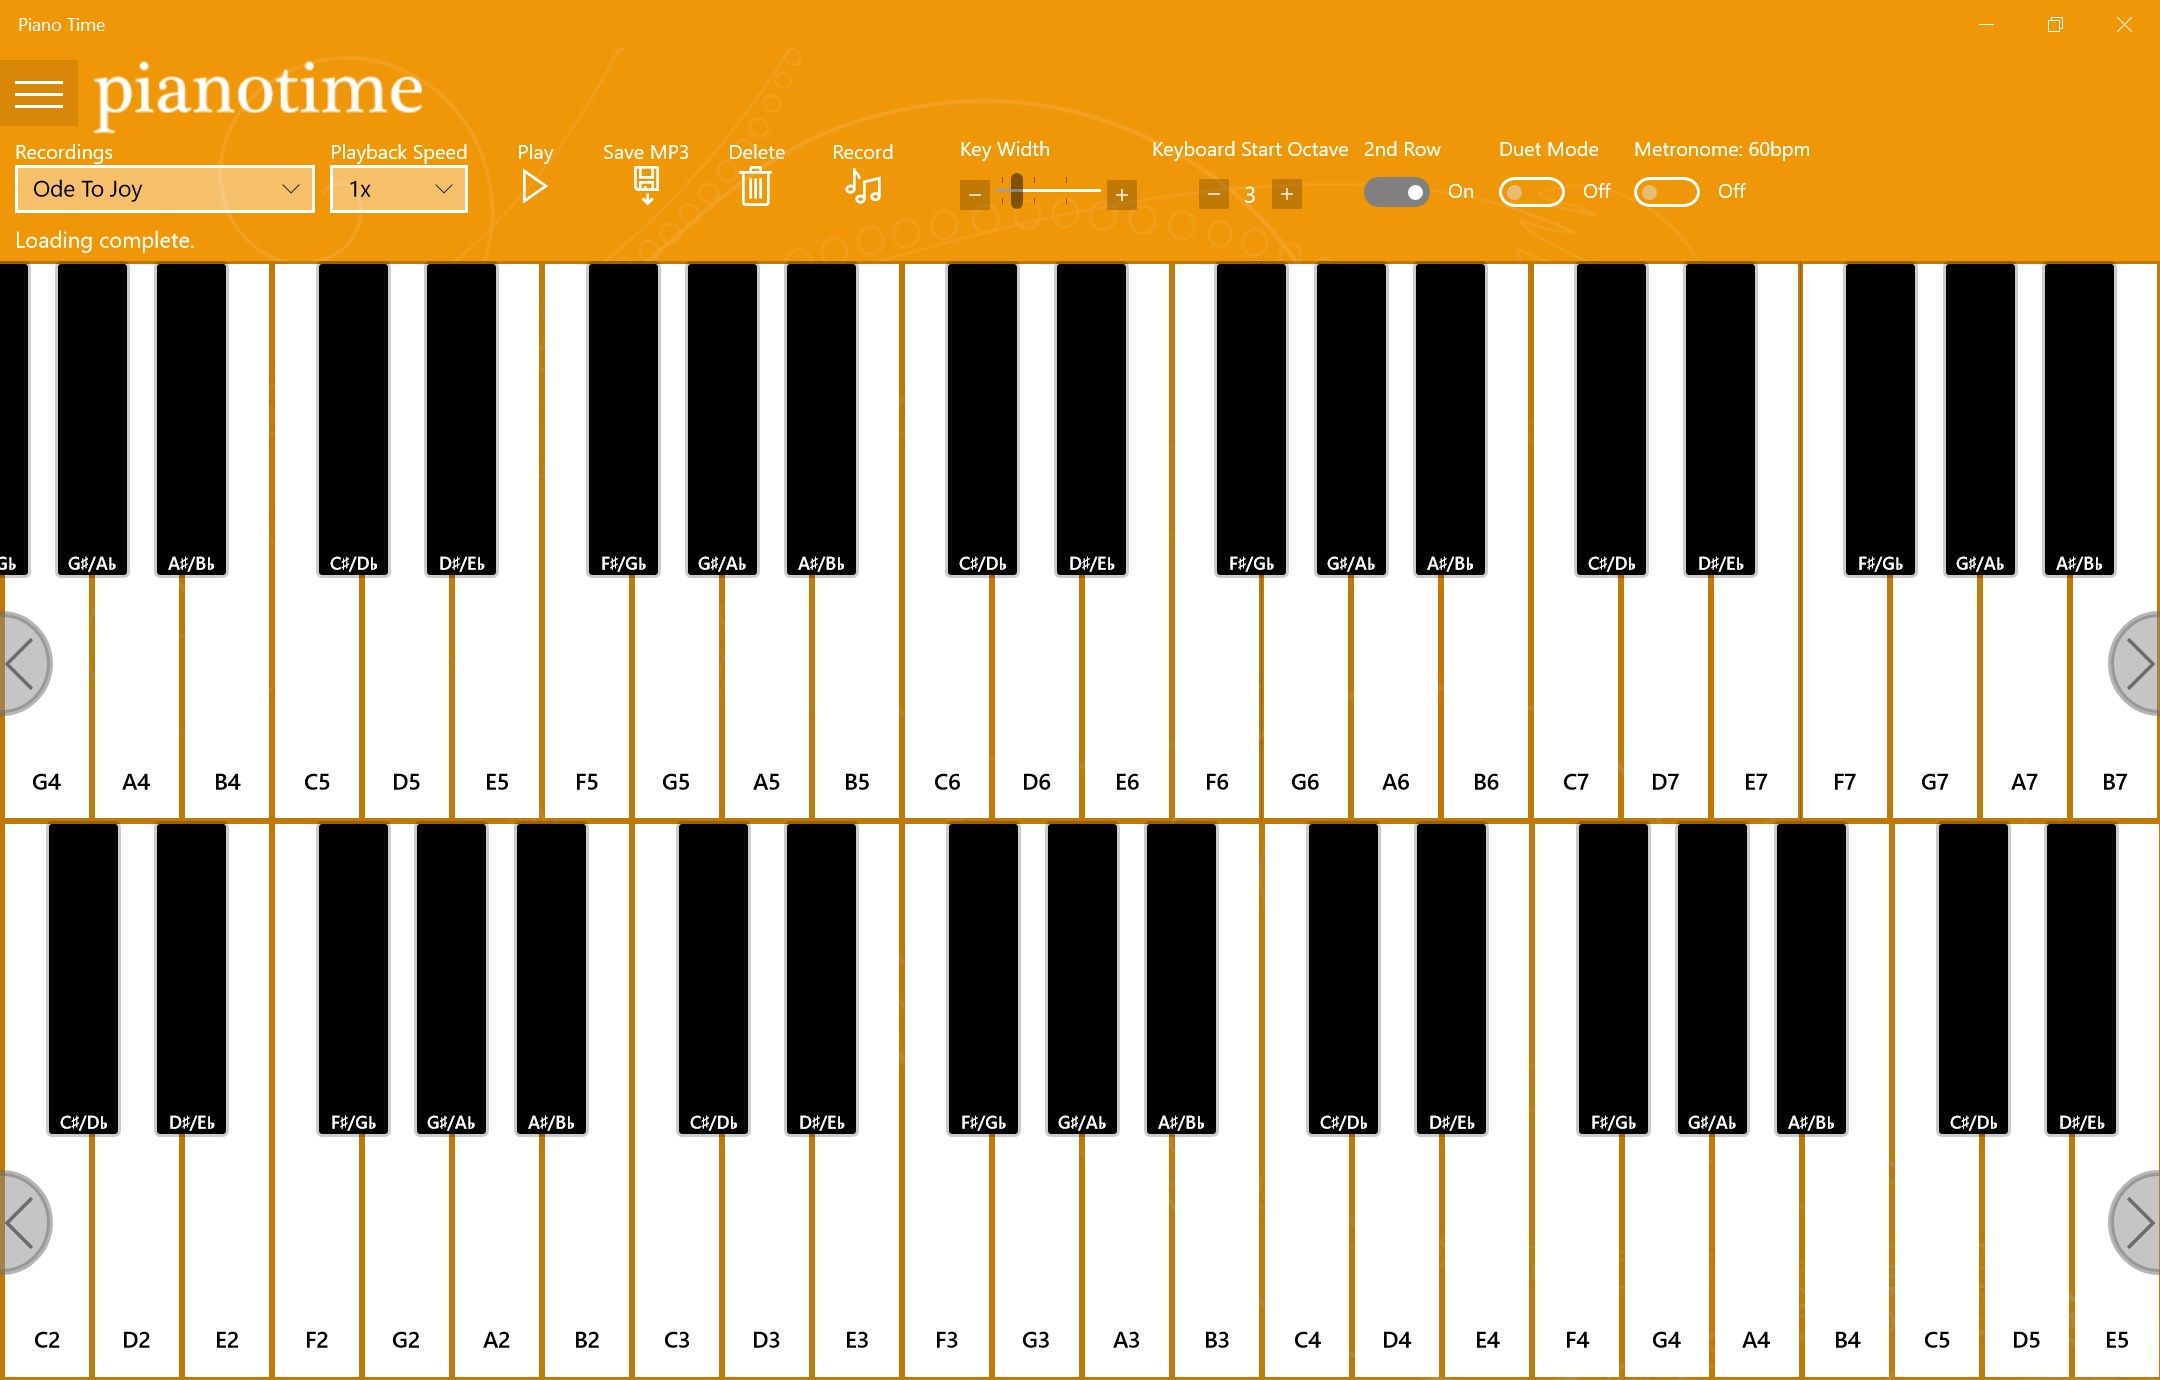 play piano with touchscreen, keyboard, or mouse. Save your recordings for later.